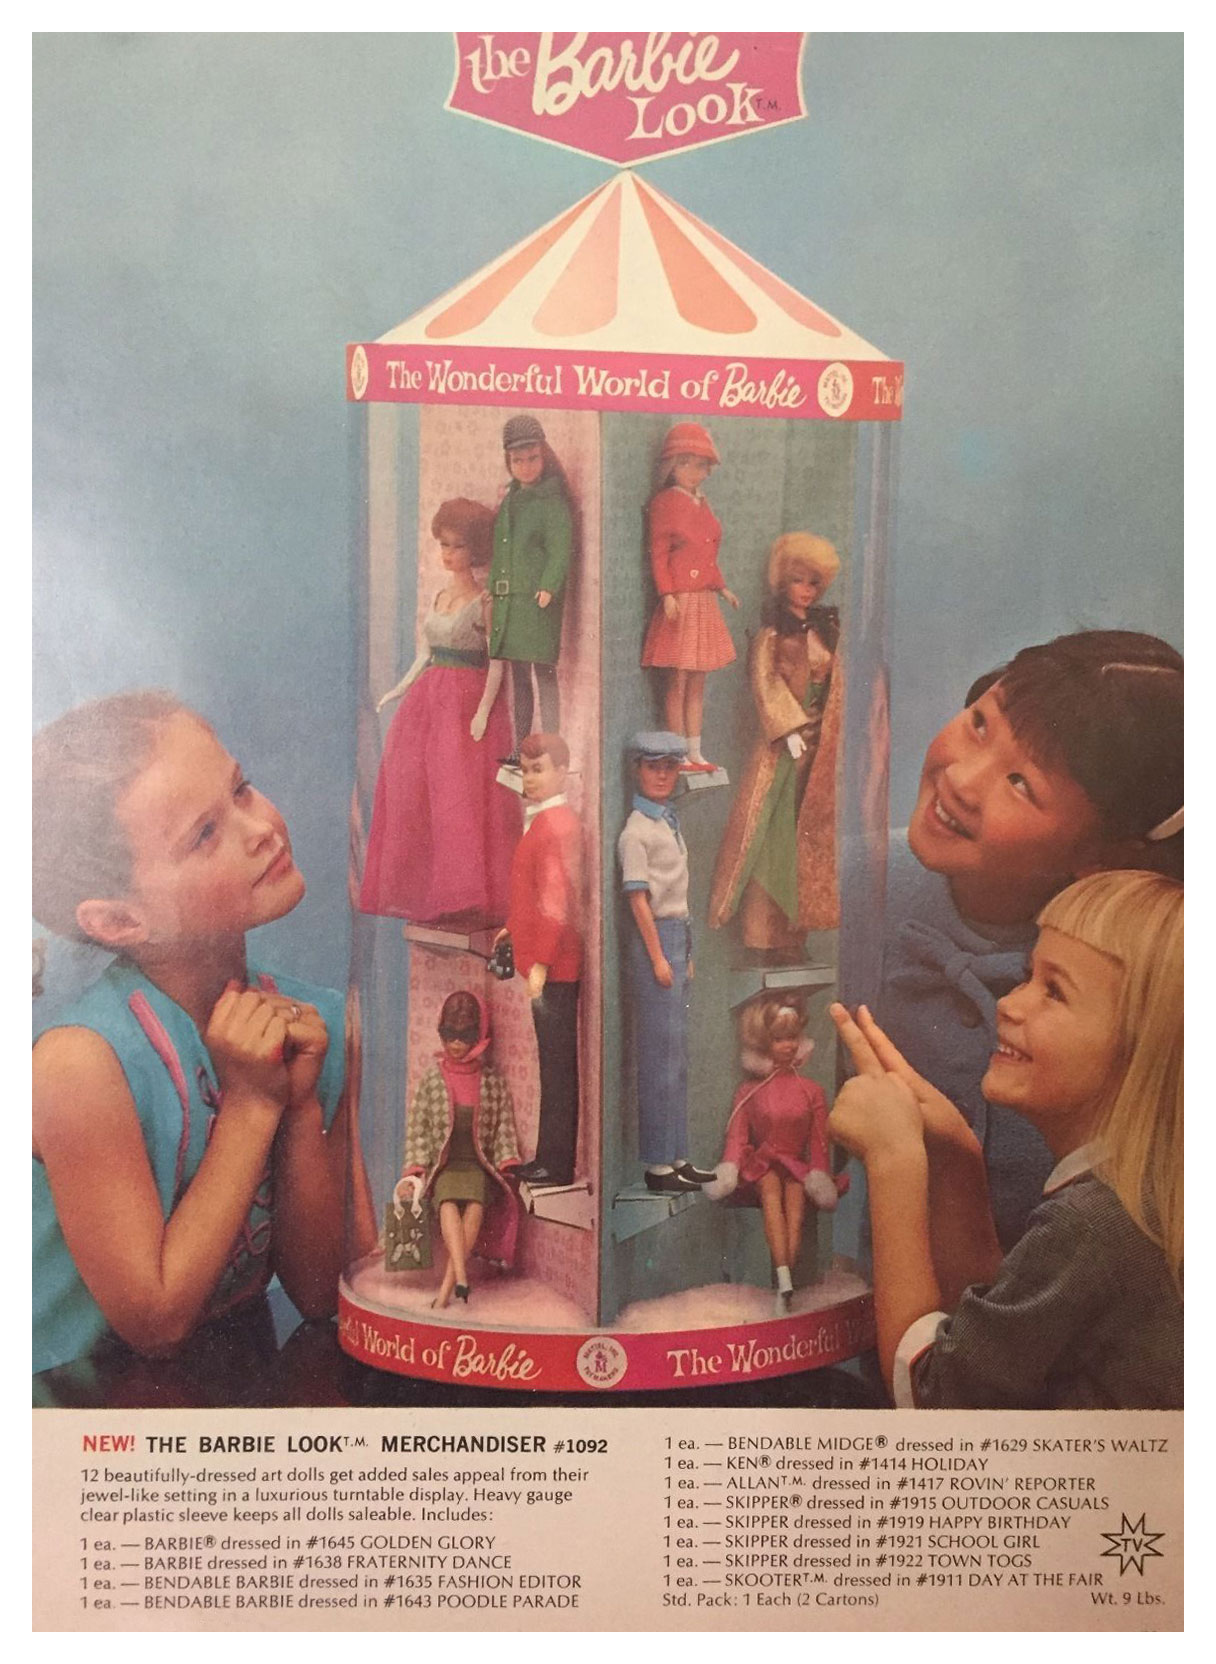 From 1965 Mattel For Fall 65 catalogue